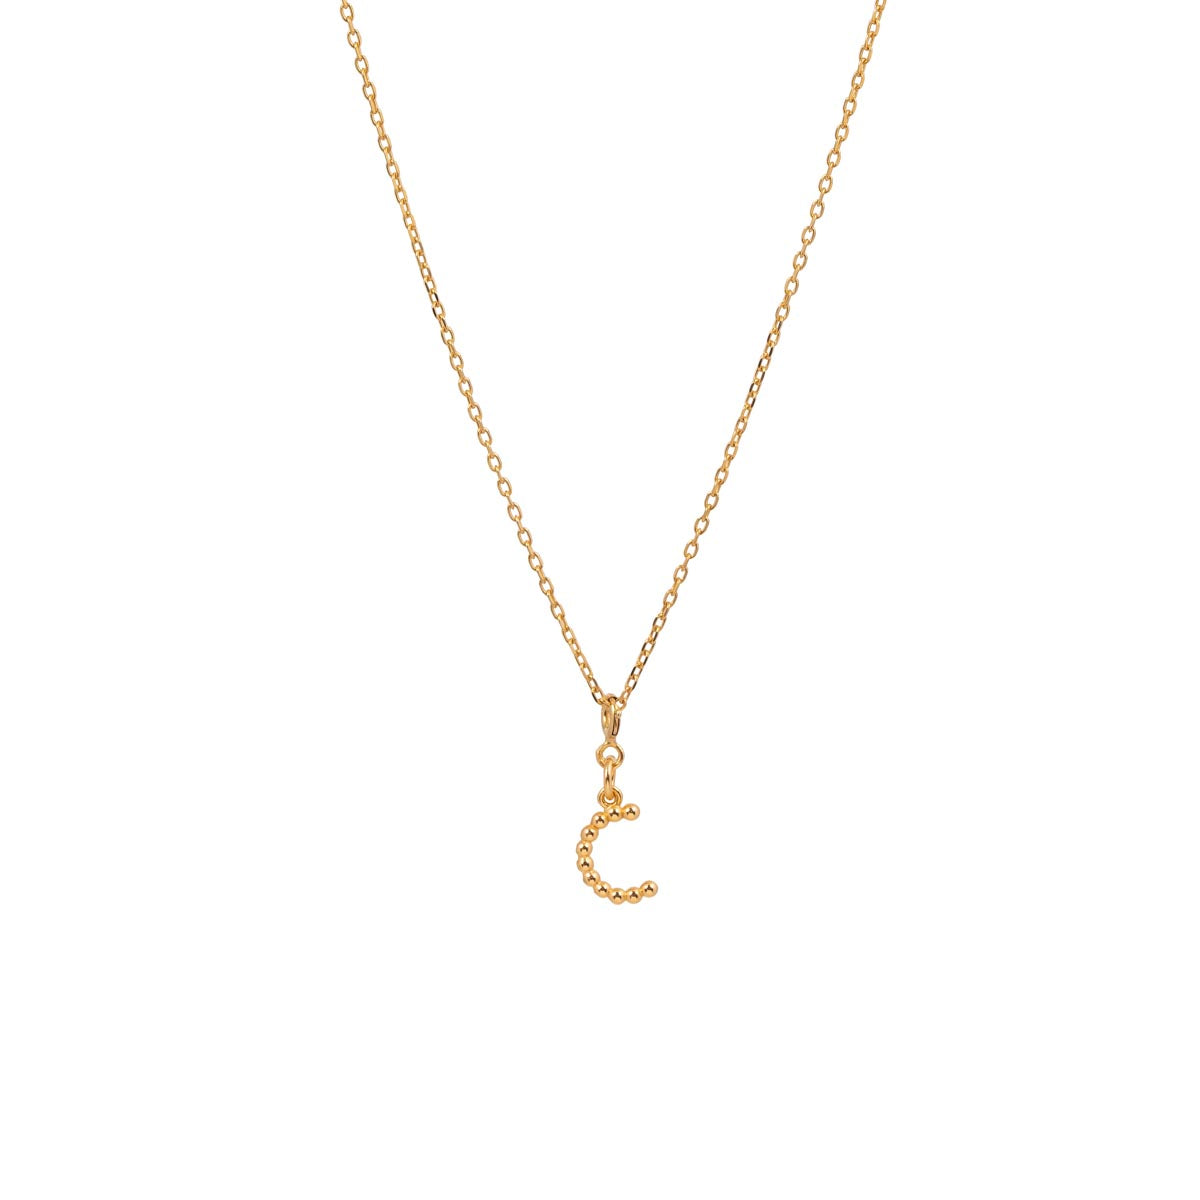 Yllätys Monogram Necklace C, gold-plated silver